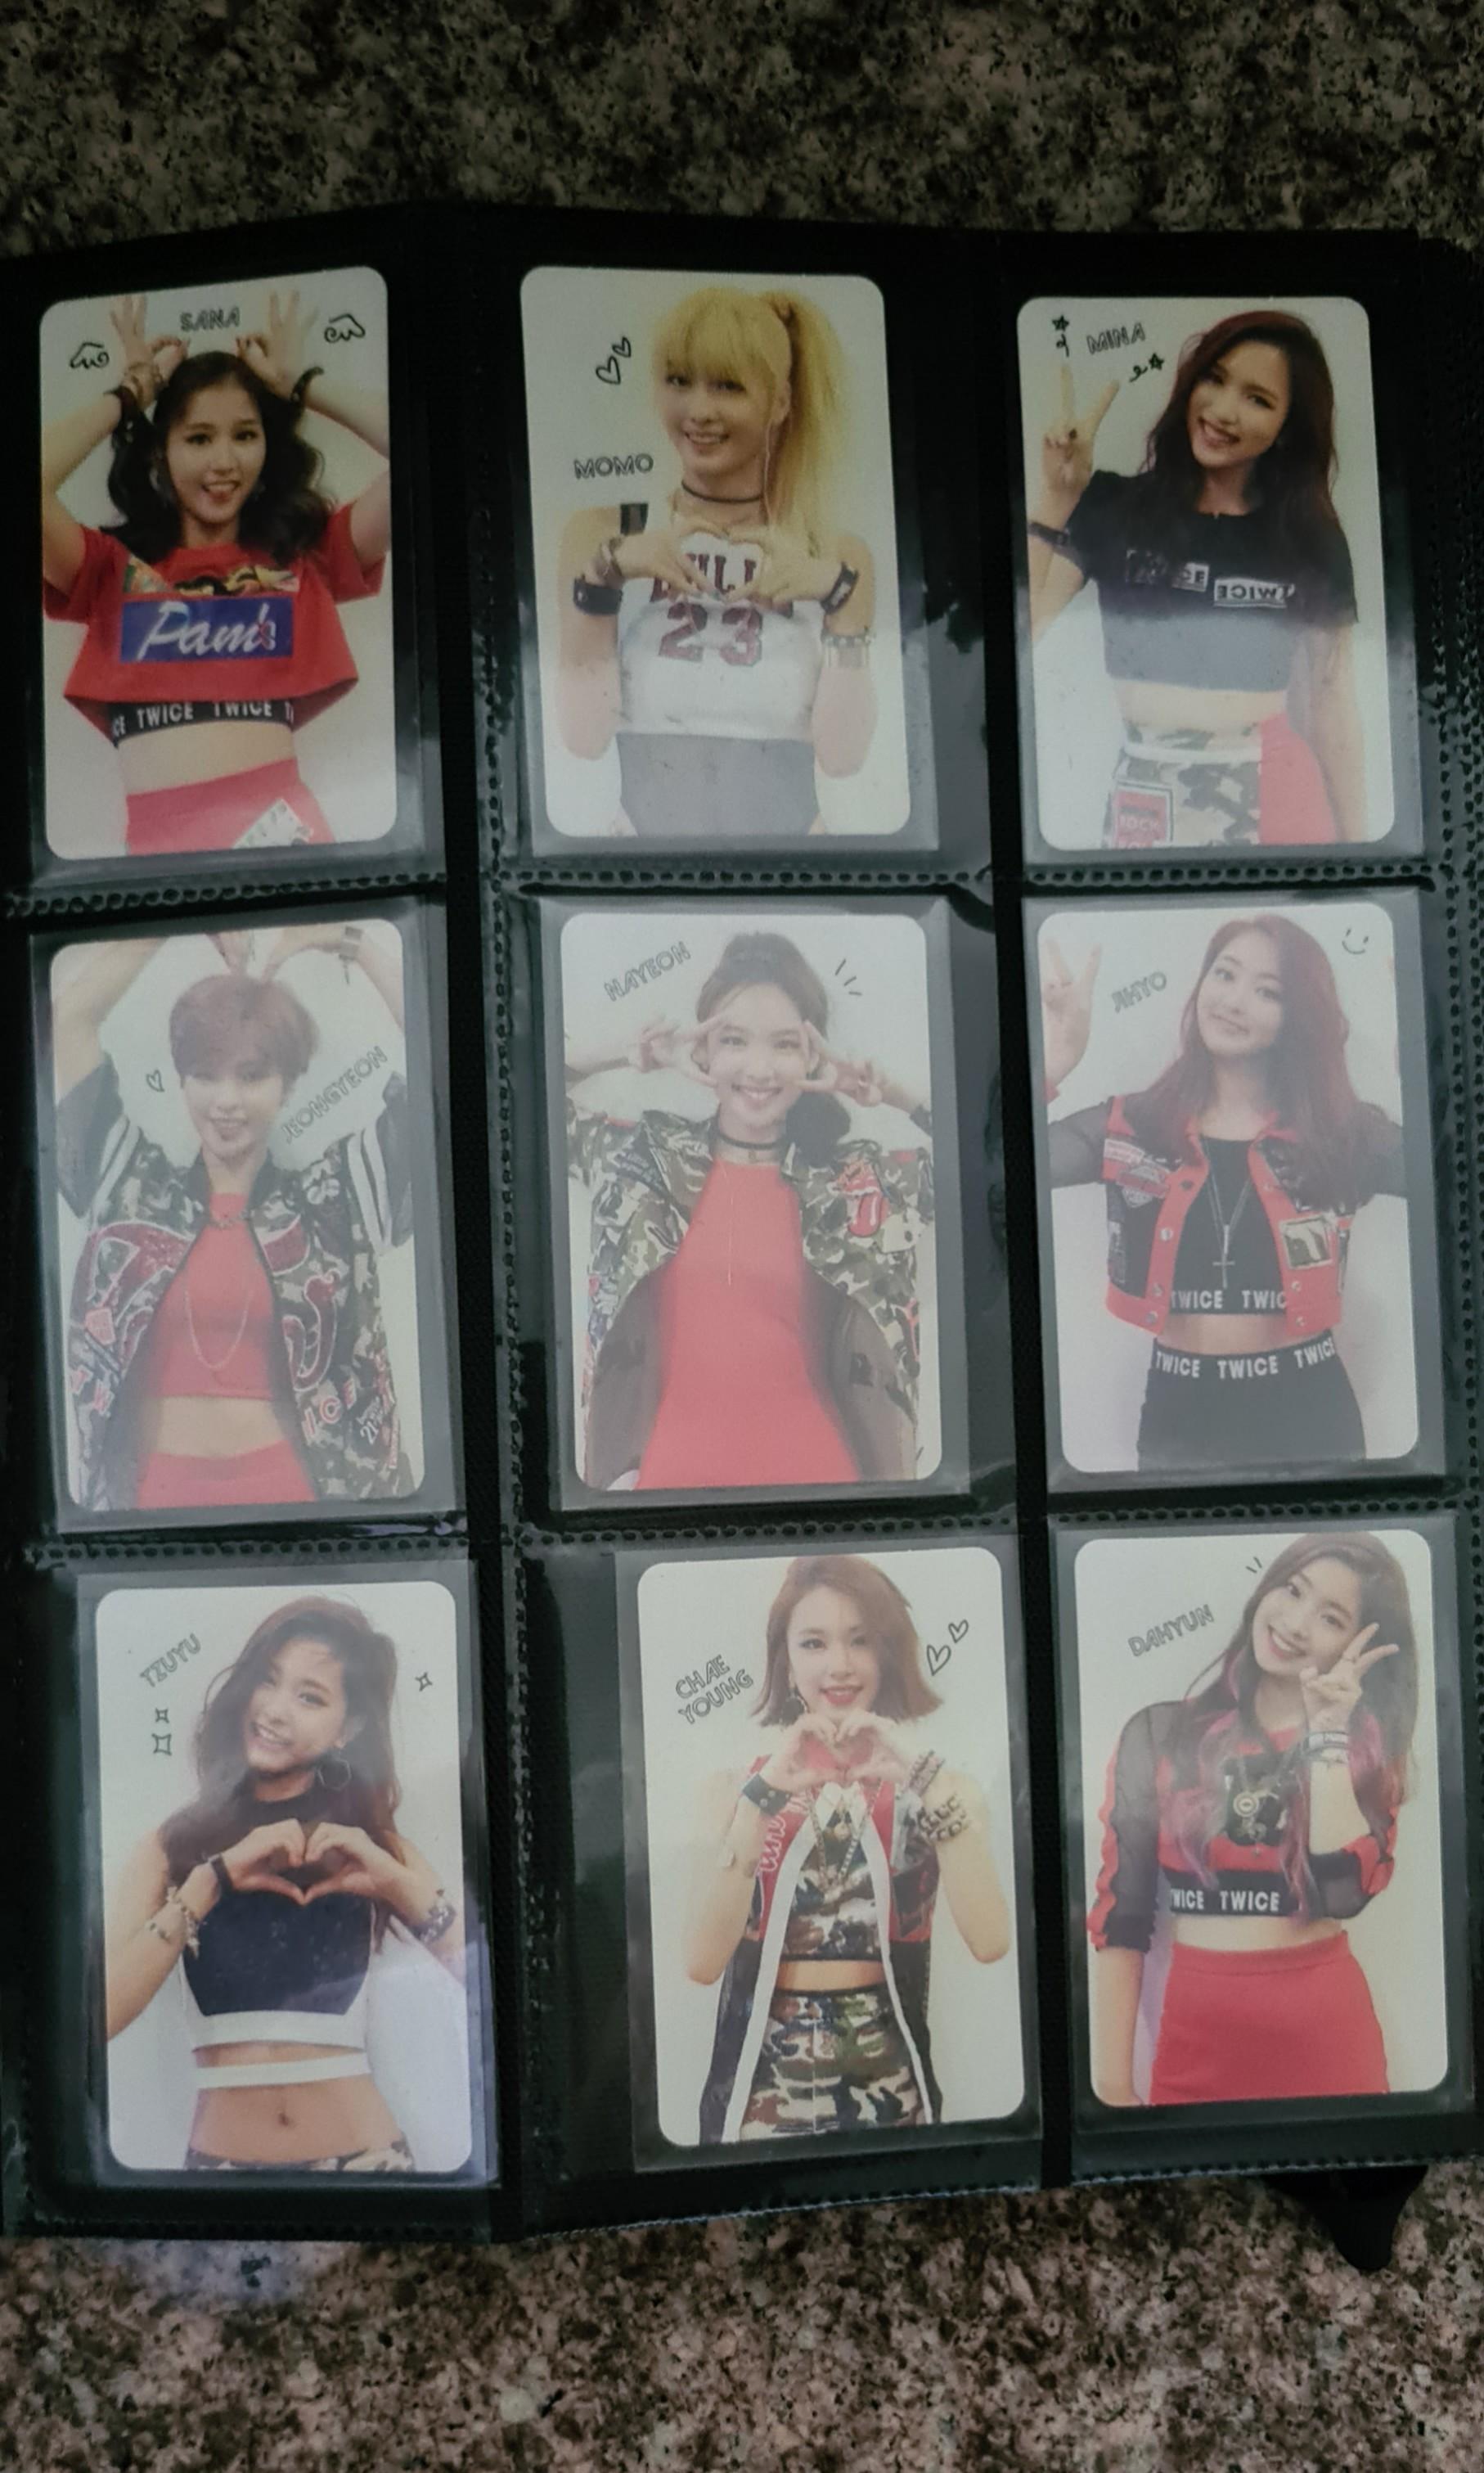 Twice Like Ooh Ahh Complete Photocard Set Hobbies Toys Memorabilia Collectibles K Wave On Carousell